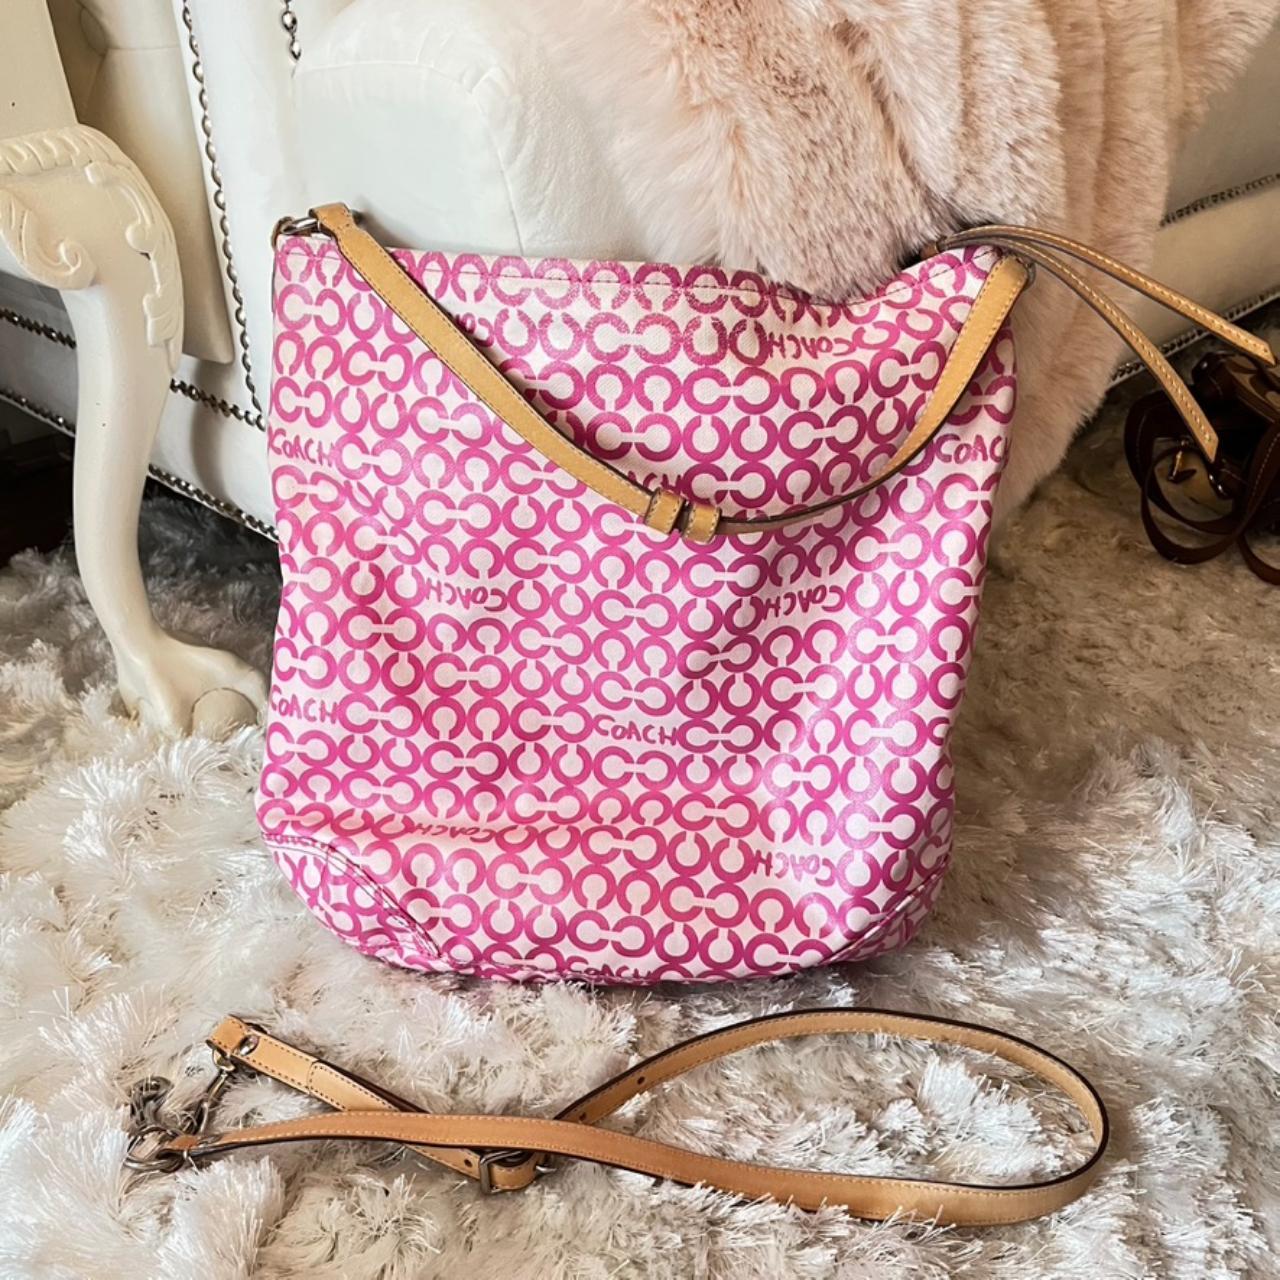 Coach | Bags | New Coach City Tote Daisy Floral Light Pink | Poshmark